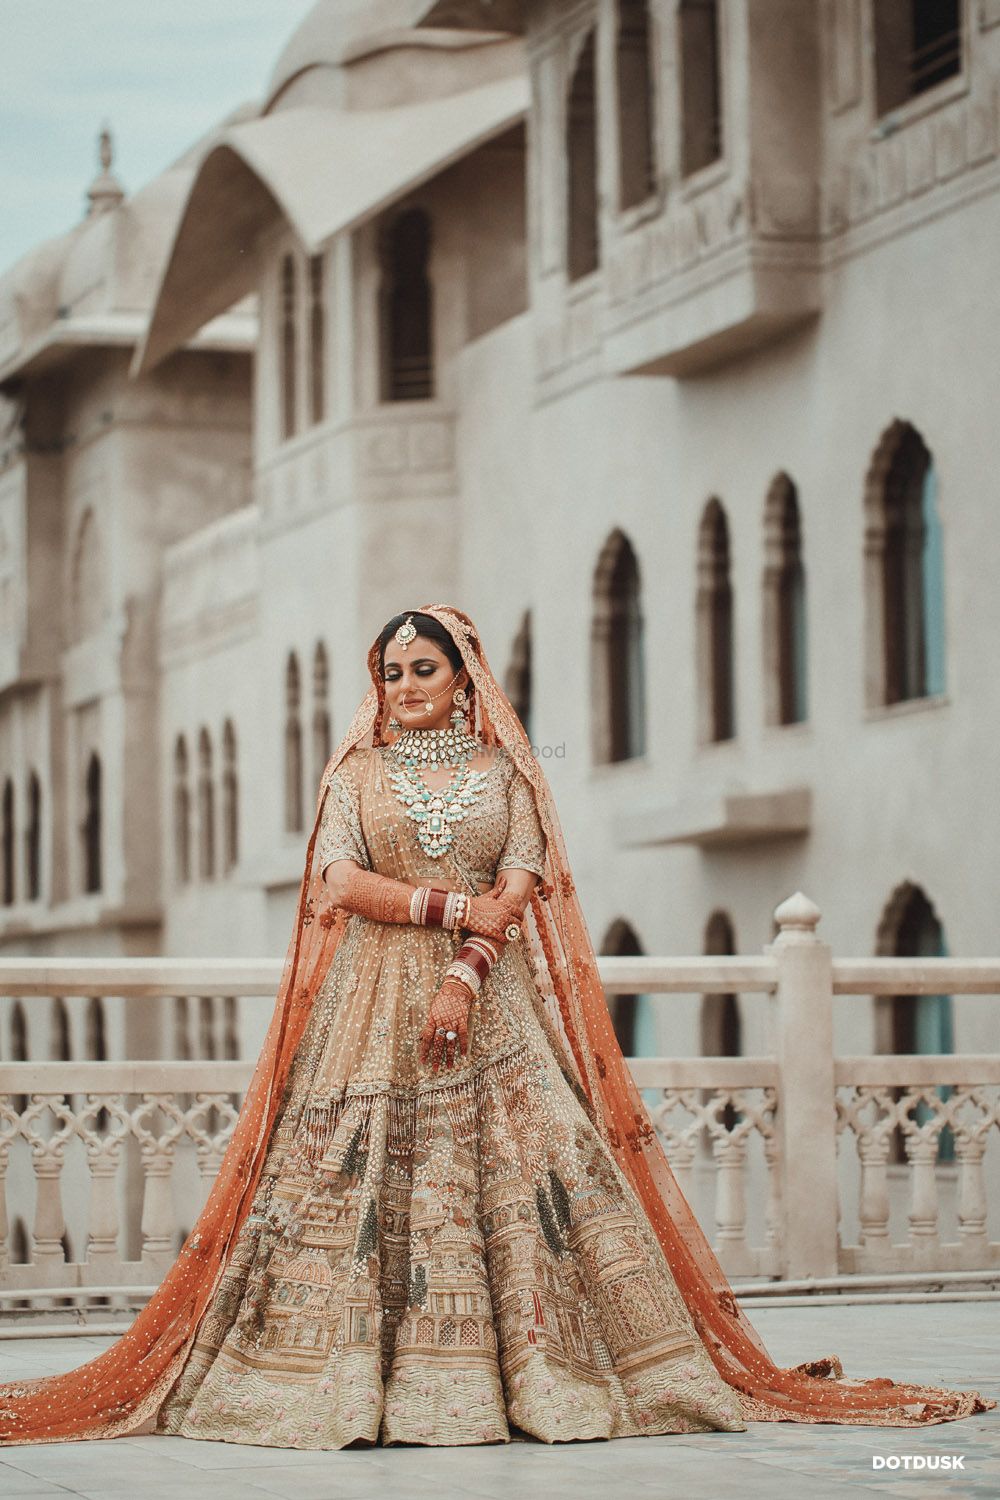 Photo of A bridal portrait with the bride in a royal lehenga